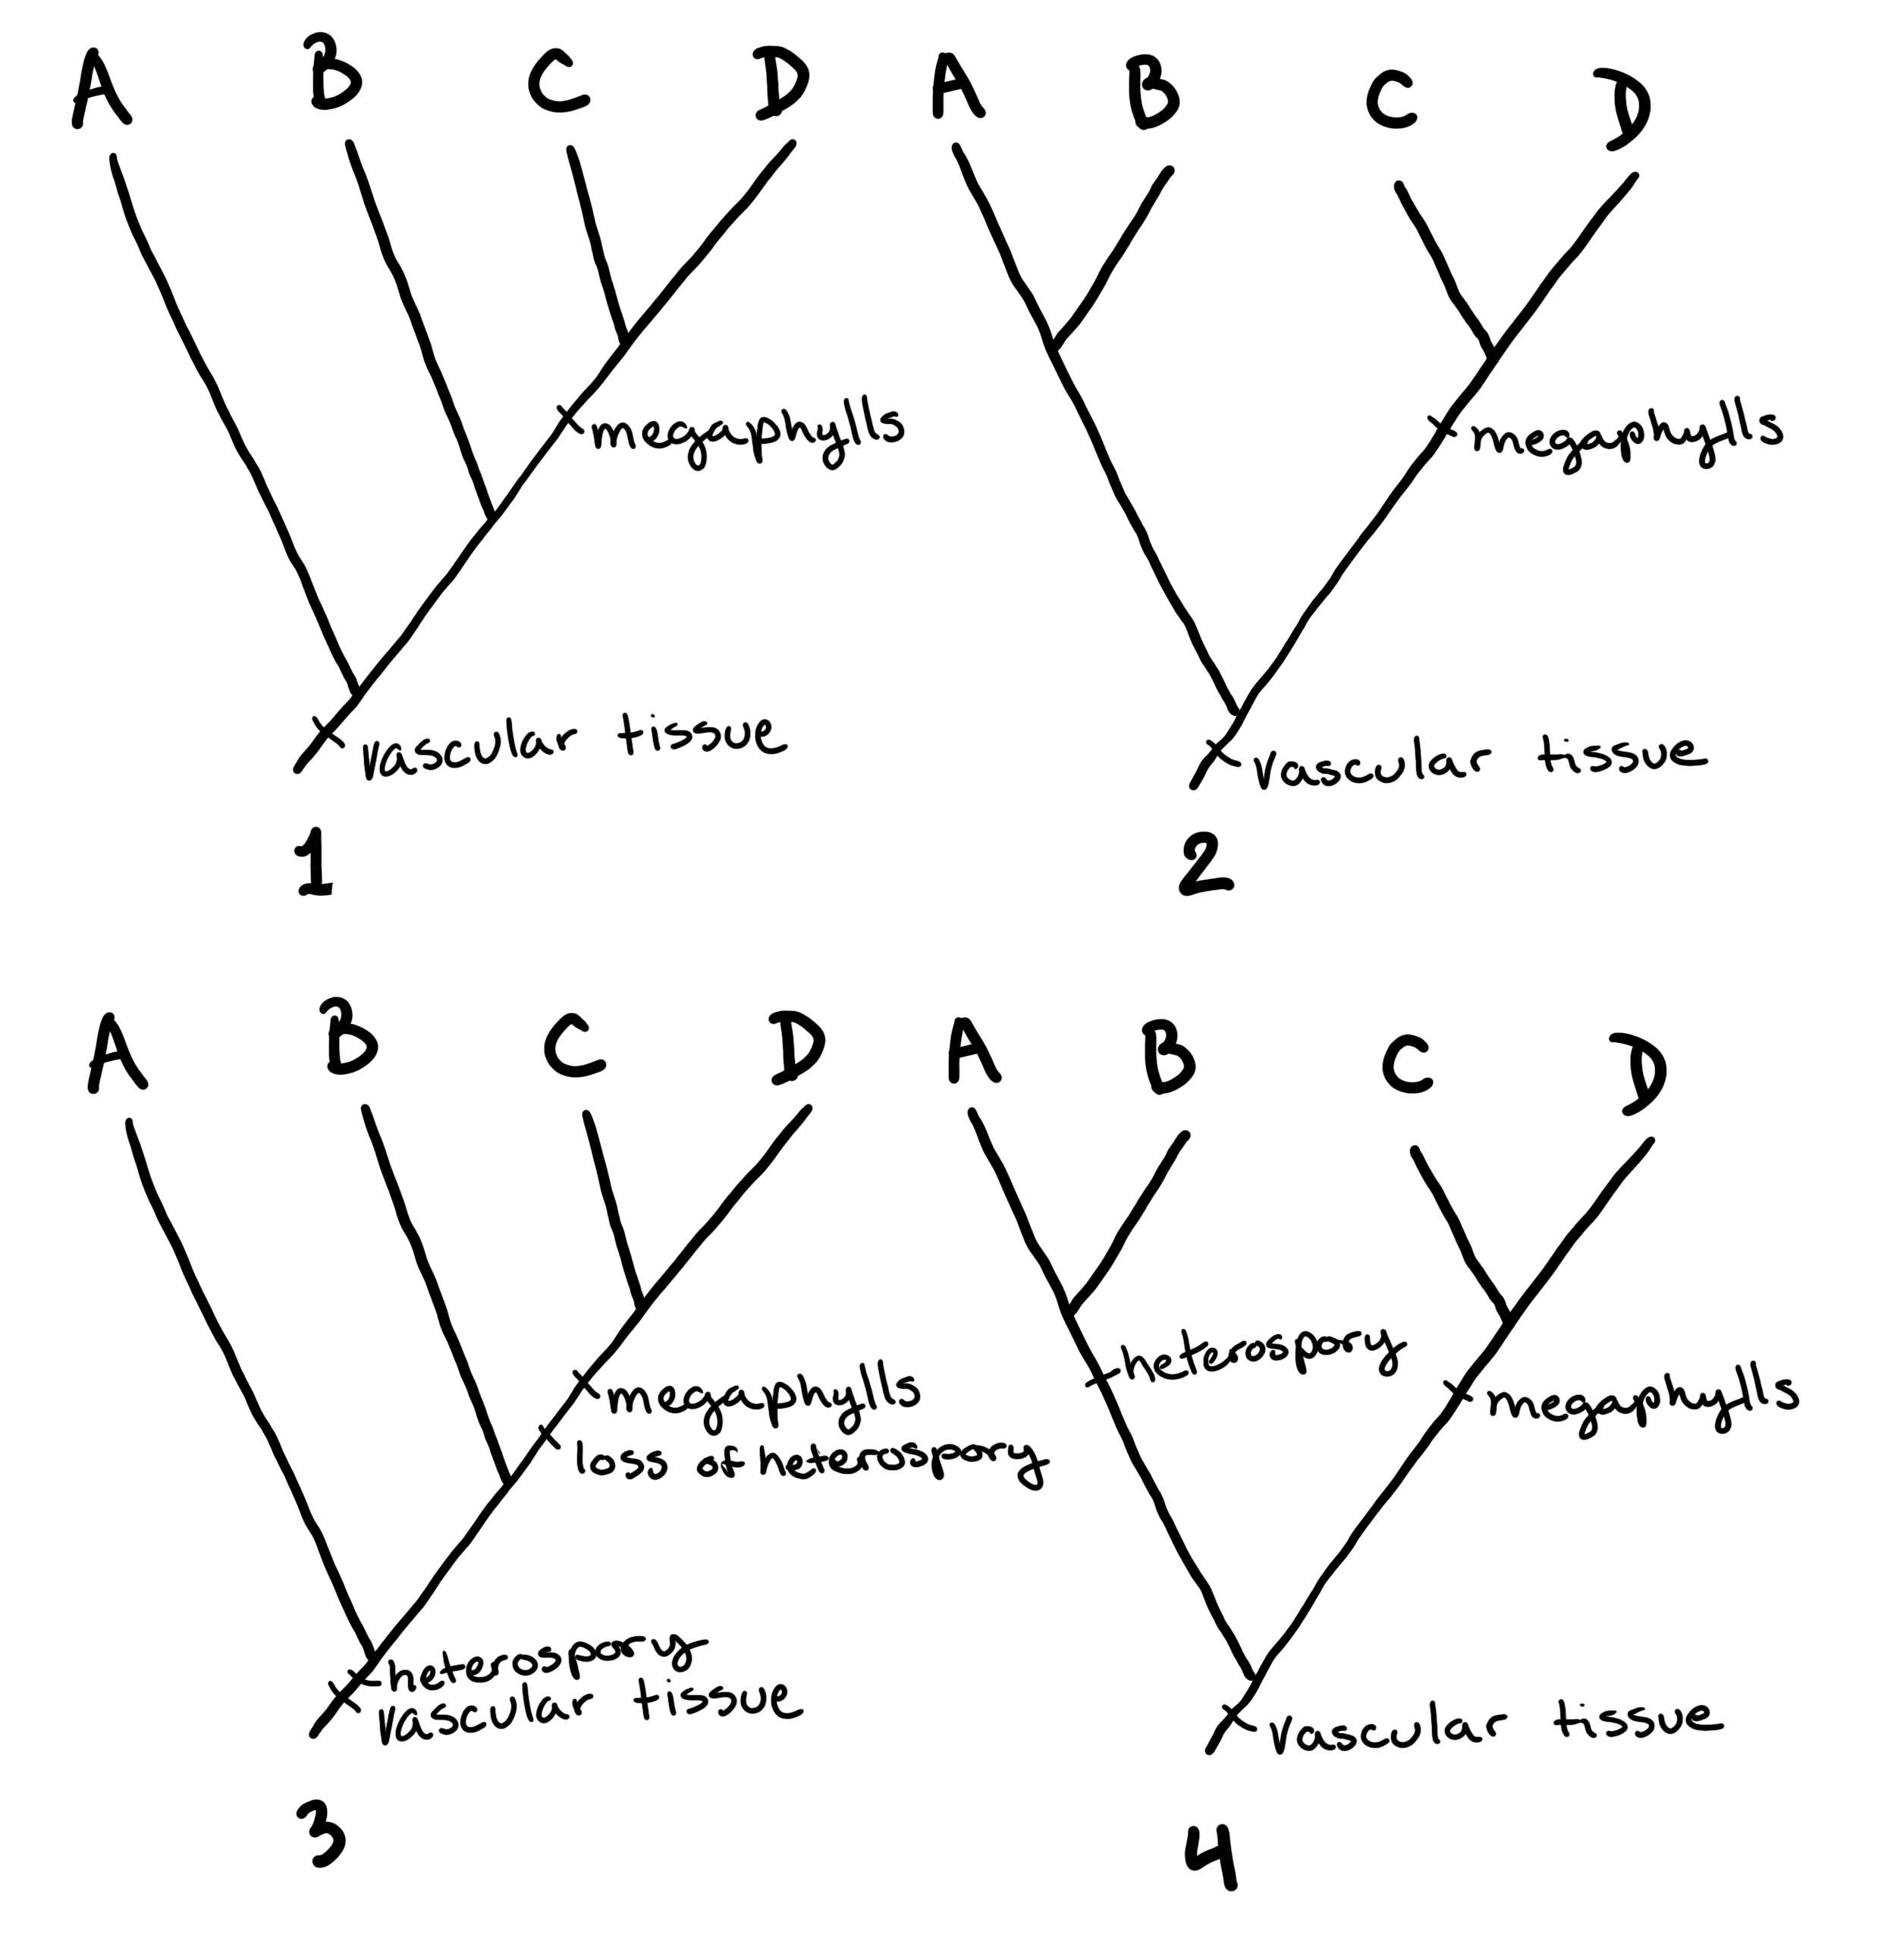 Four trees communicating the relationships between A, B, C, and D. However, this time there are traits added to the trees. 